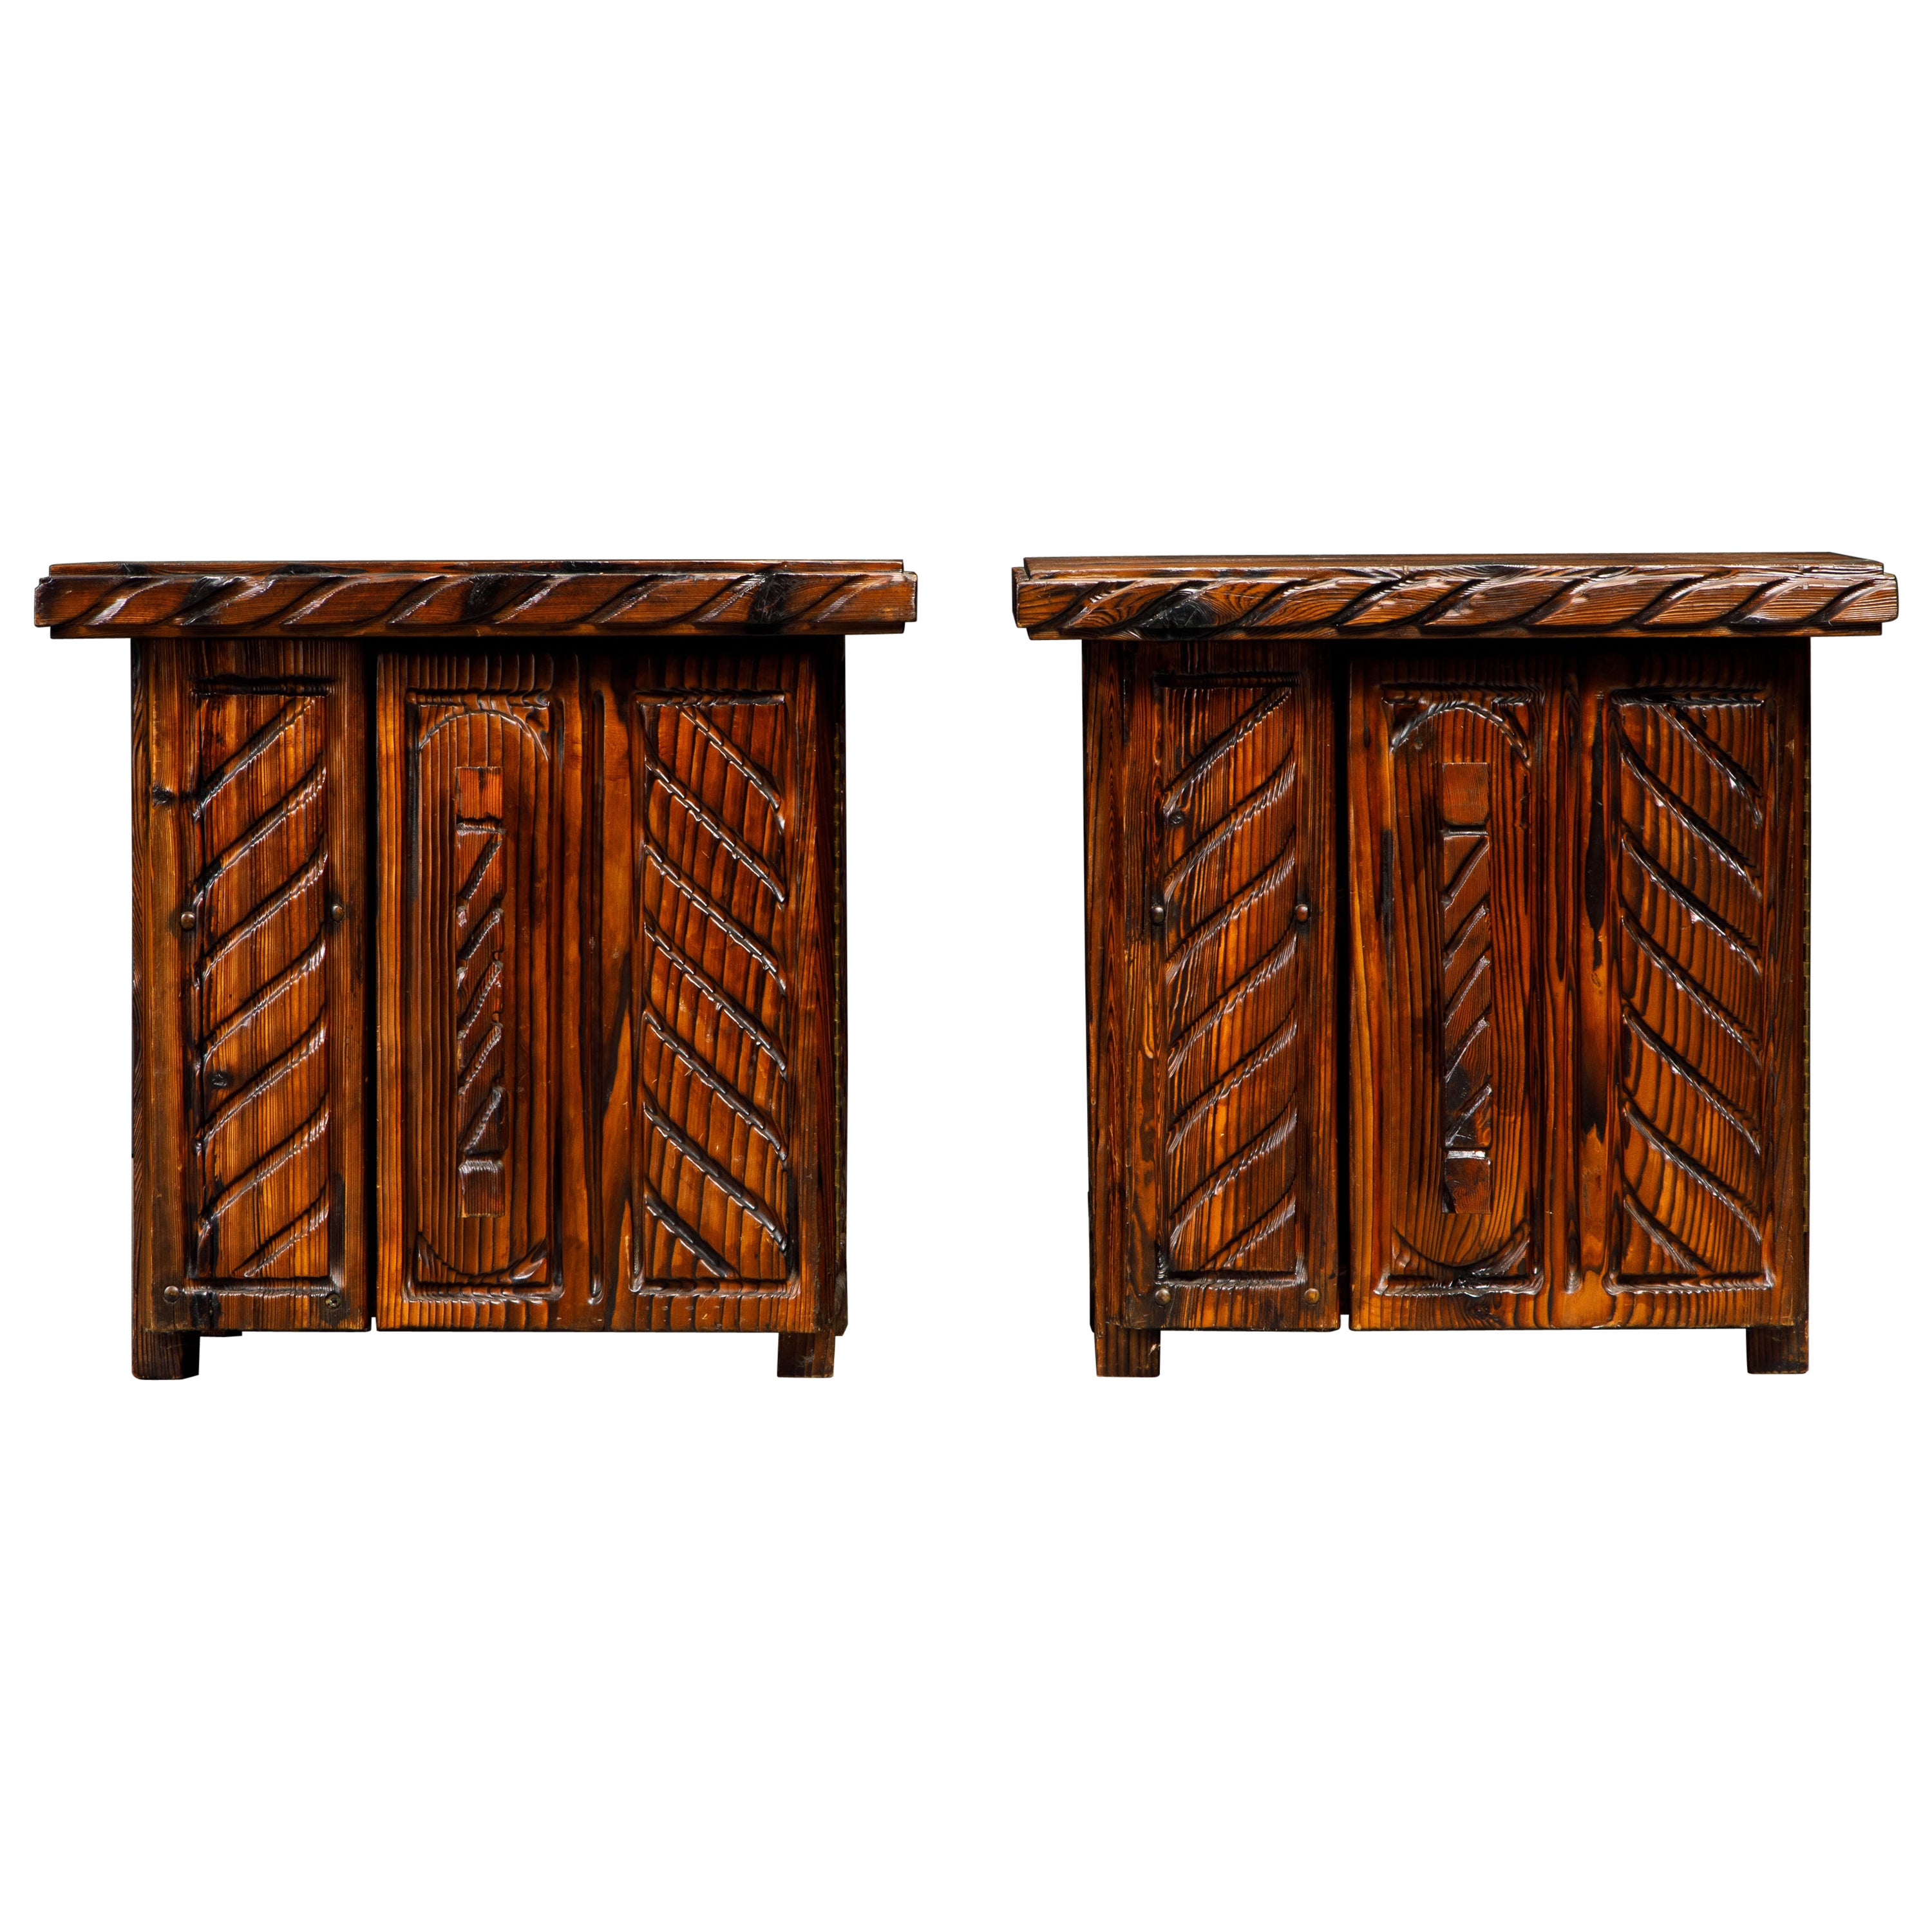 Pair of Exotic Carved End Tables by William Westenhaver for Witco, c 1950